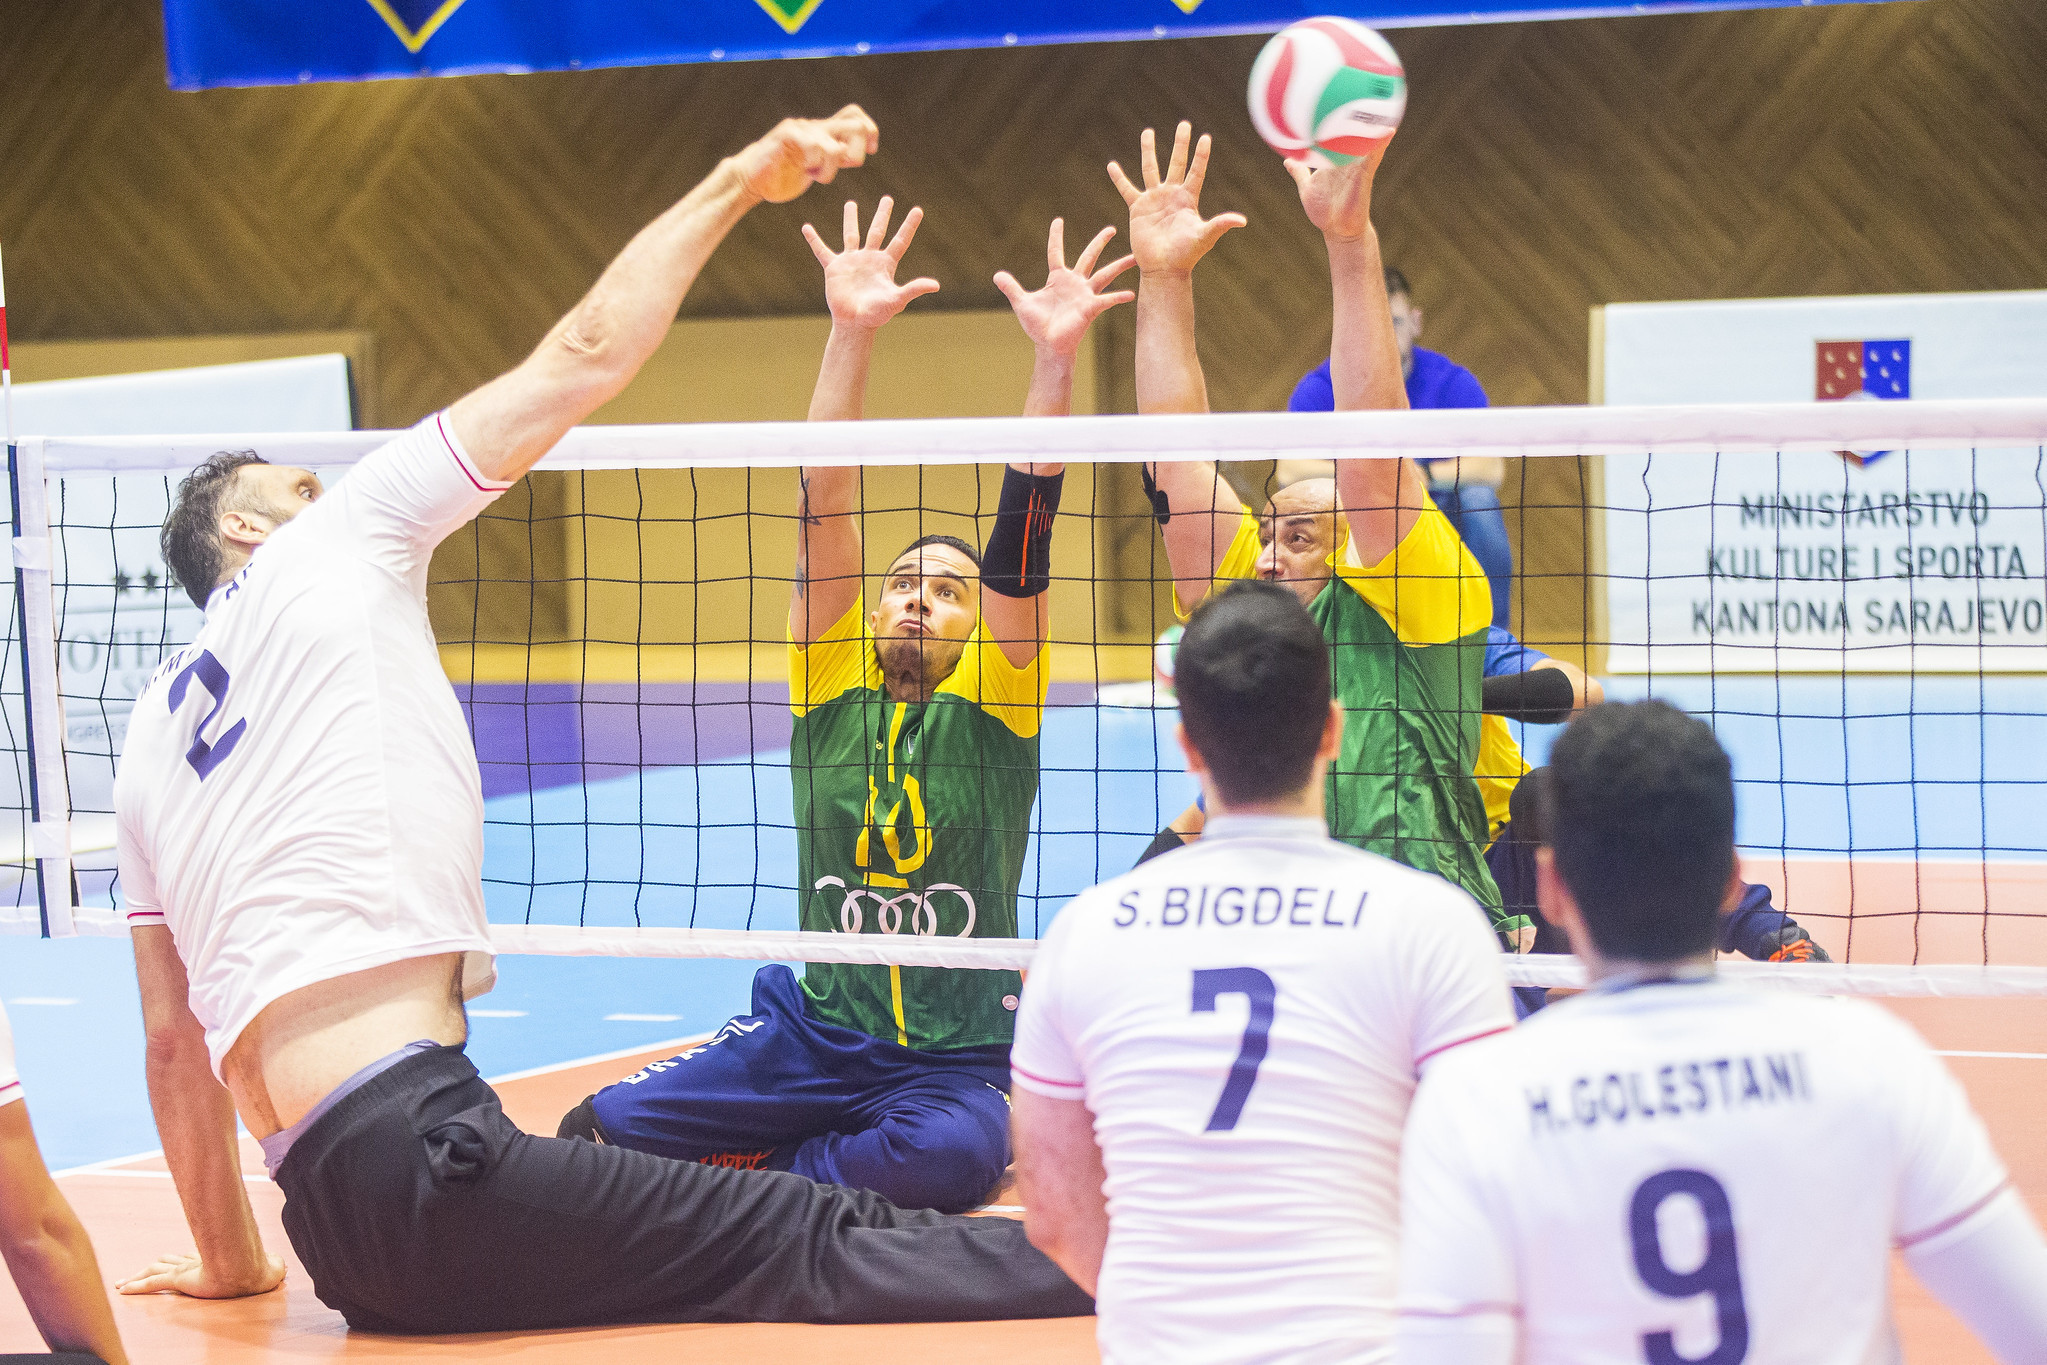 Bosnia and Herzegovina and Iran to put unbeaten records on line in men’s Sitting Volleyball World Championship final